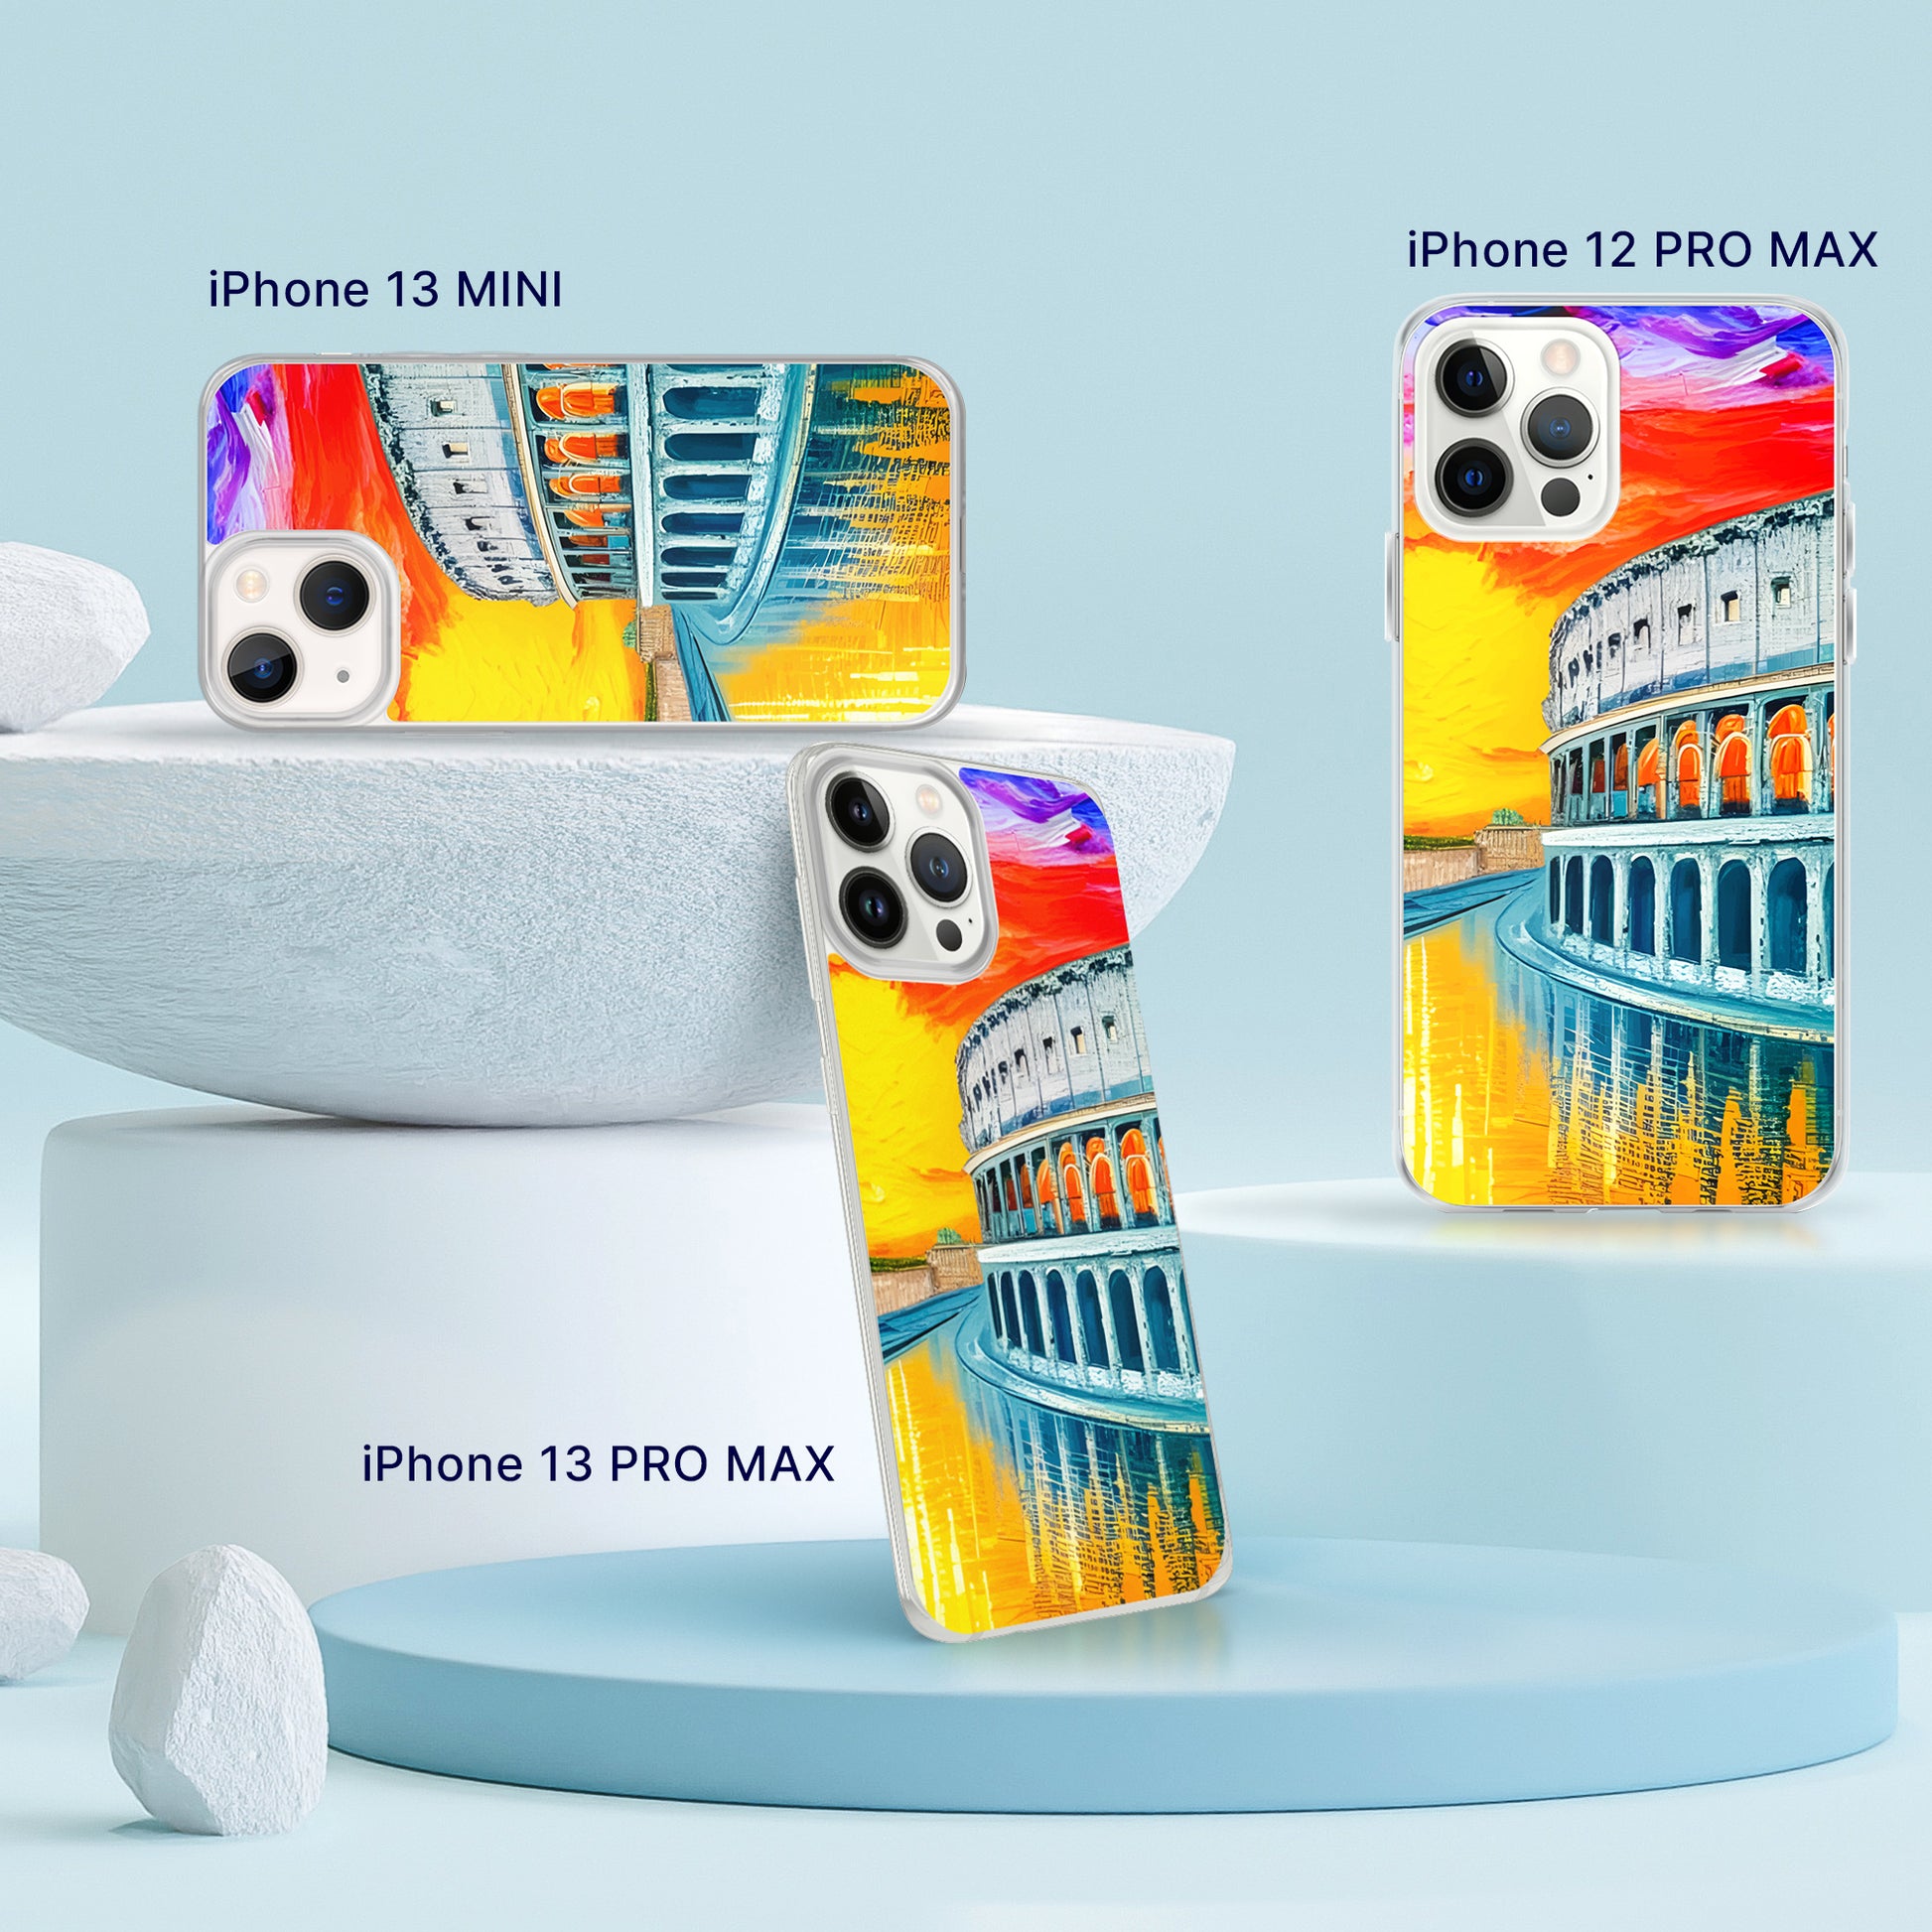 Fashionable iPhone Case with cityscape painting - Rome| Seepu | 13 MINI, 12 PRO MAX, 13 PRO MAX